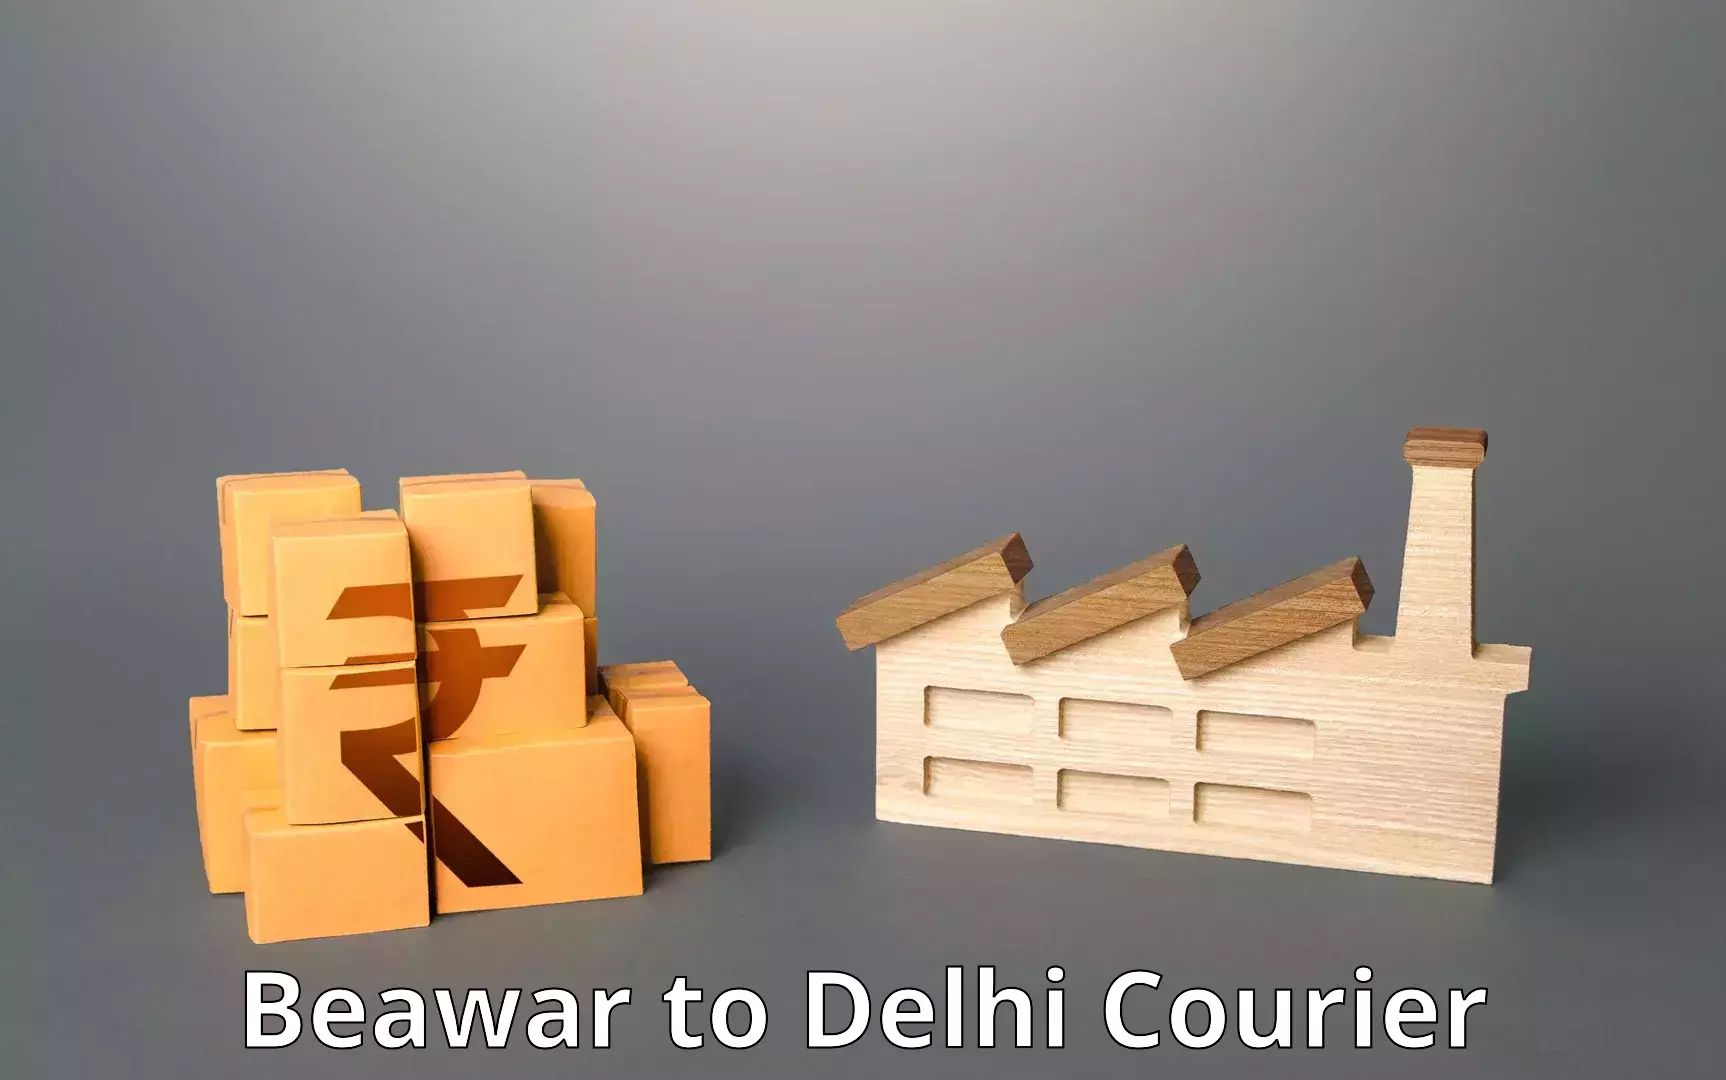 Overnight delivery services Beawar to Delhi